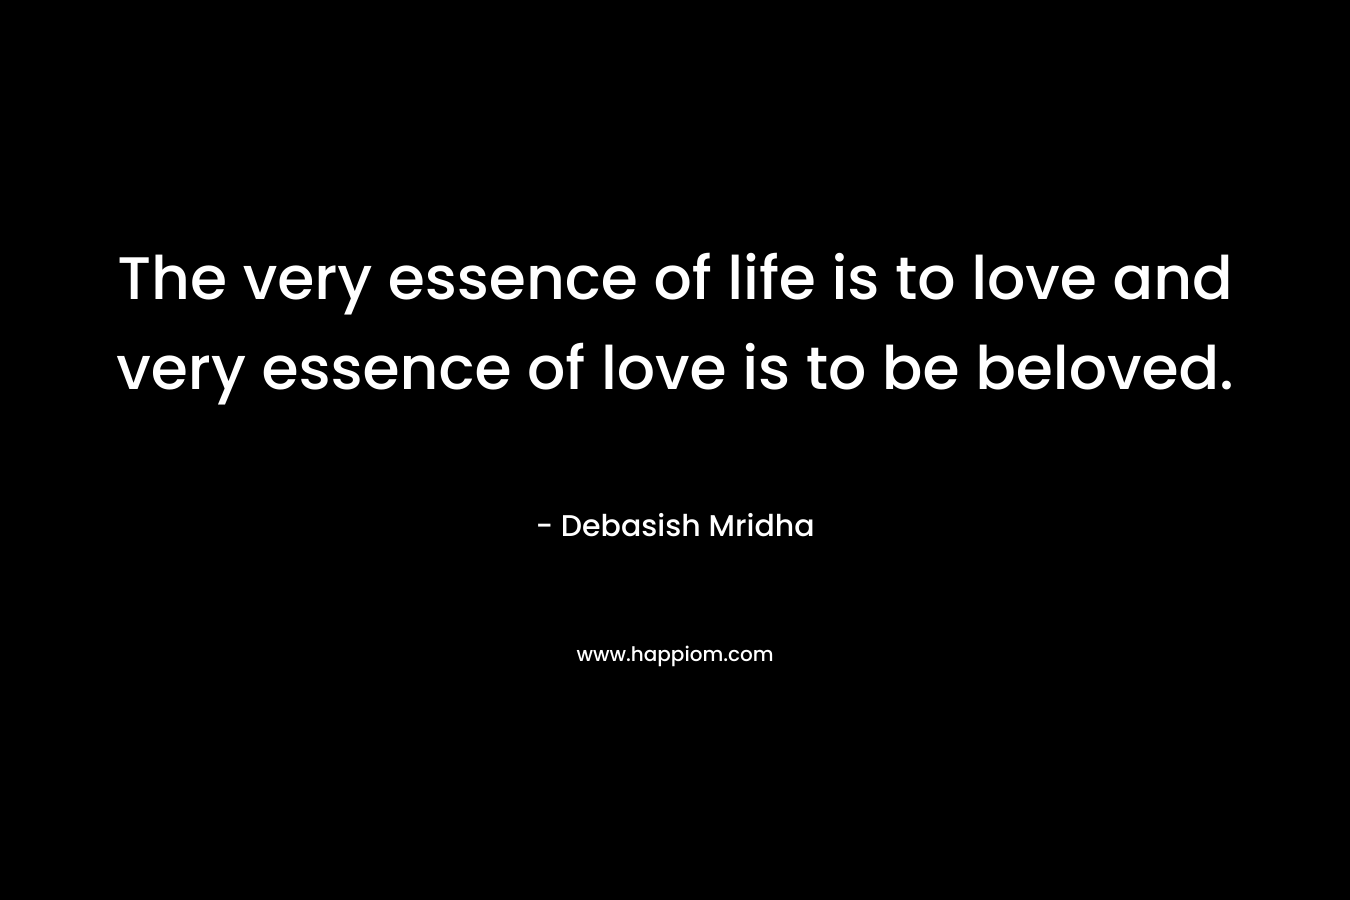 The very essence of life is to love and very essence of love is to be beloved.